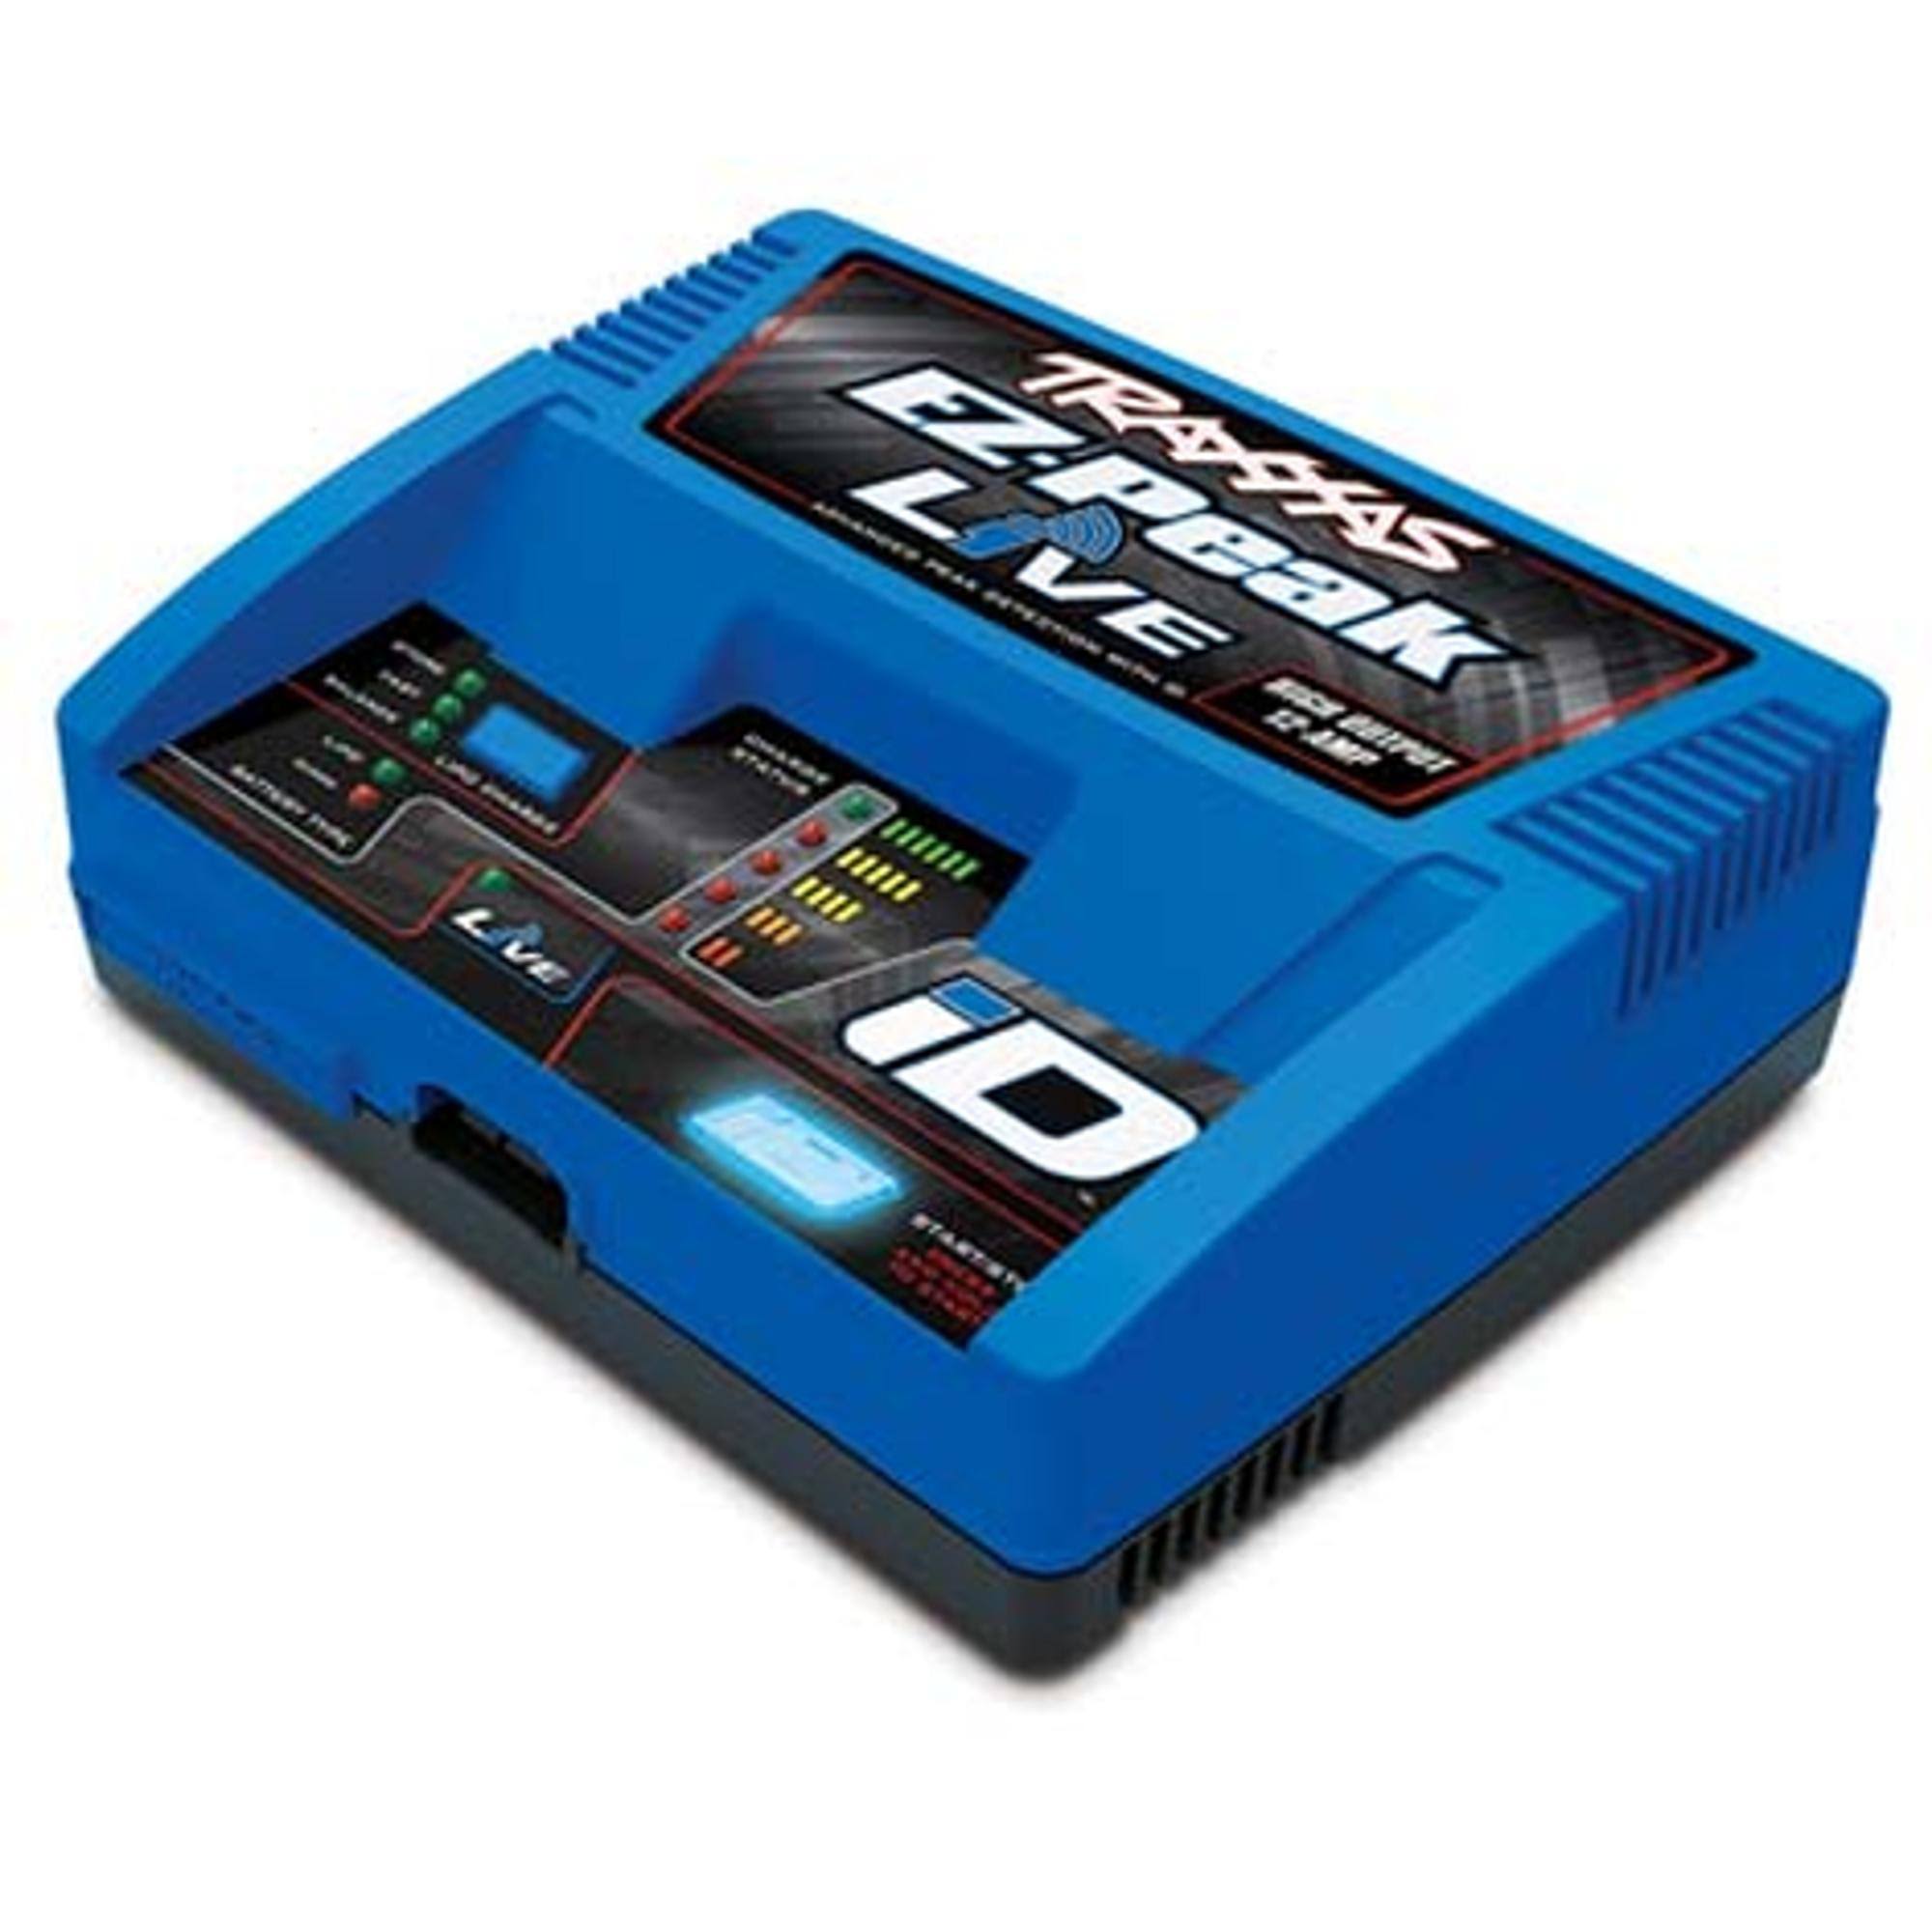 Traxxas Ez-peak Live Lipo NiMh LiPo Battery Charger - 12amp, 100W, with iD Auto Battery Identification